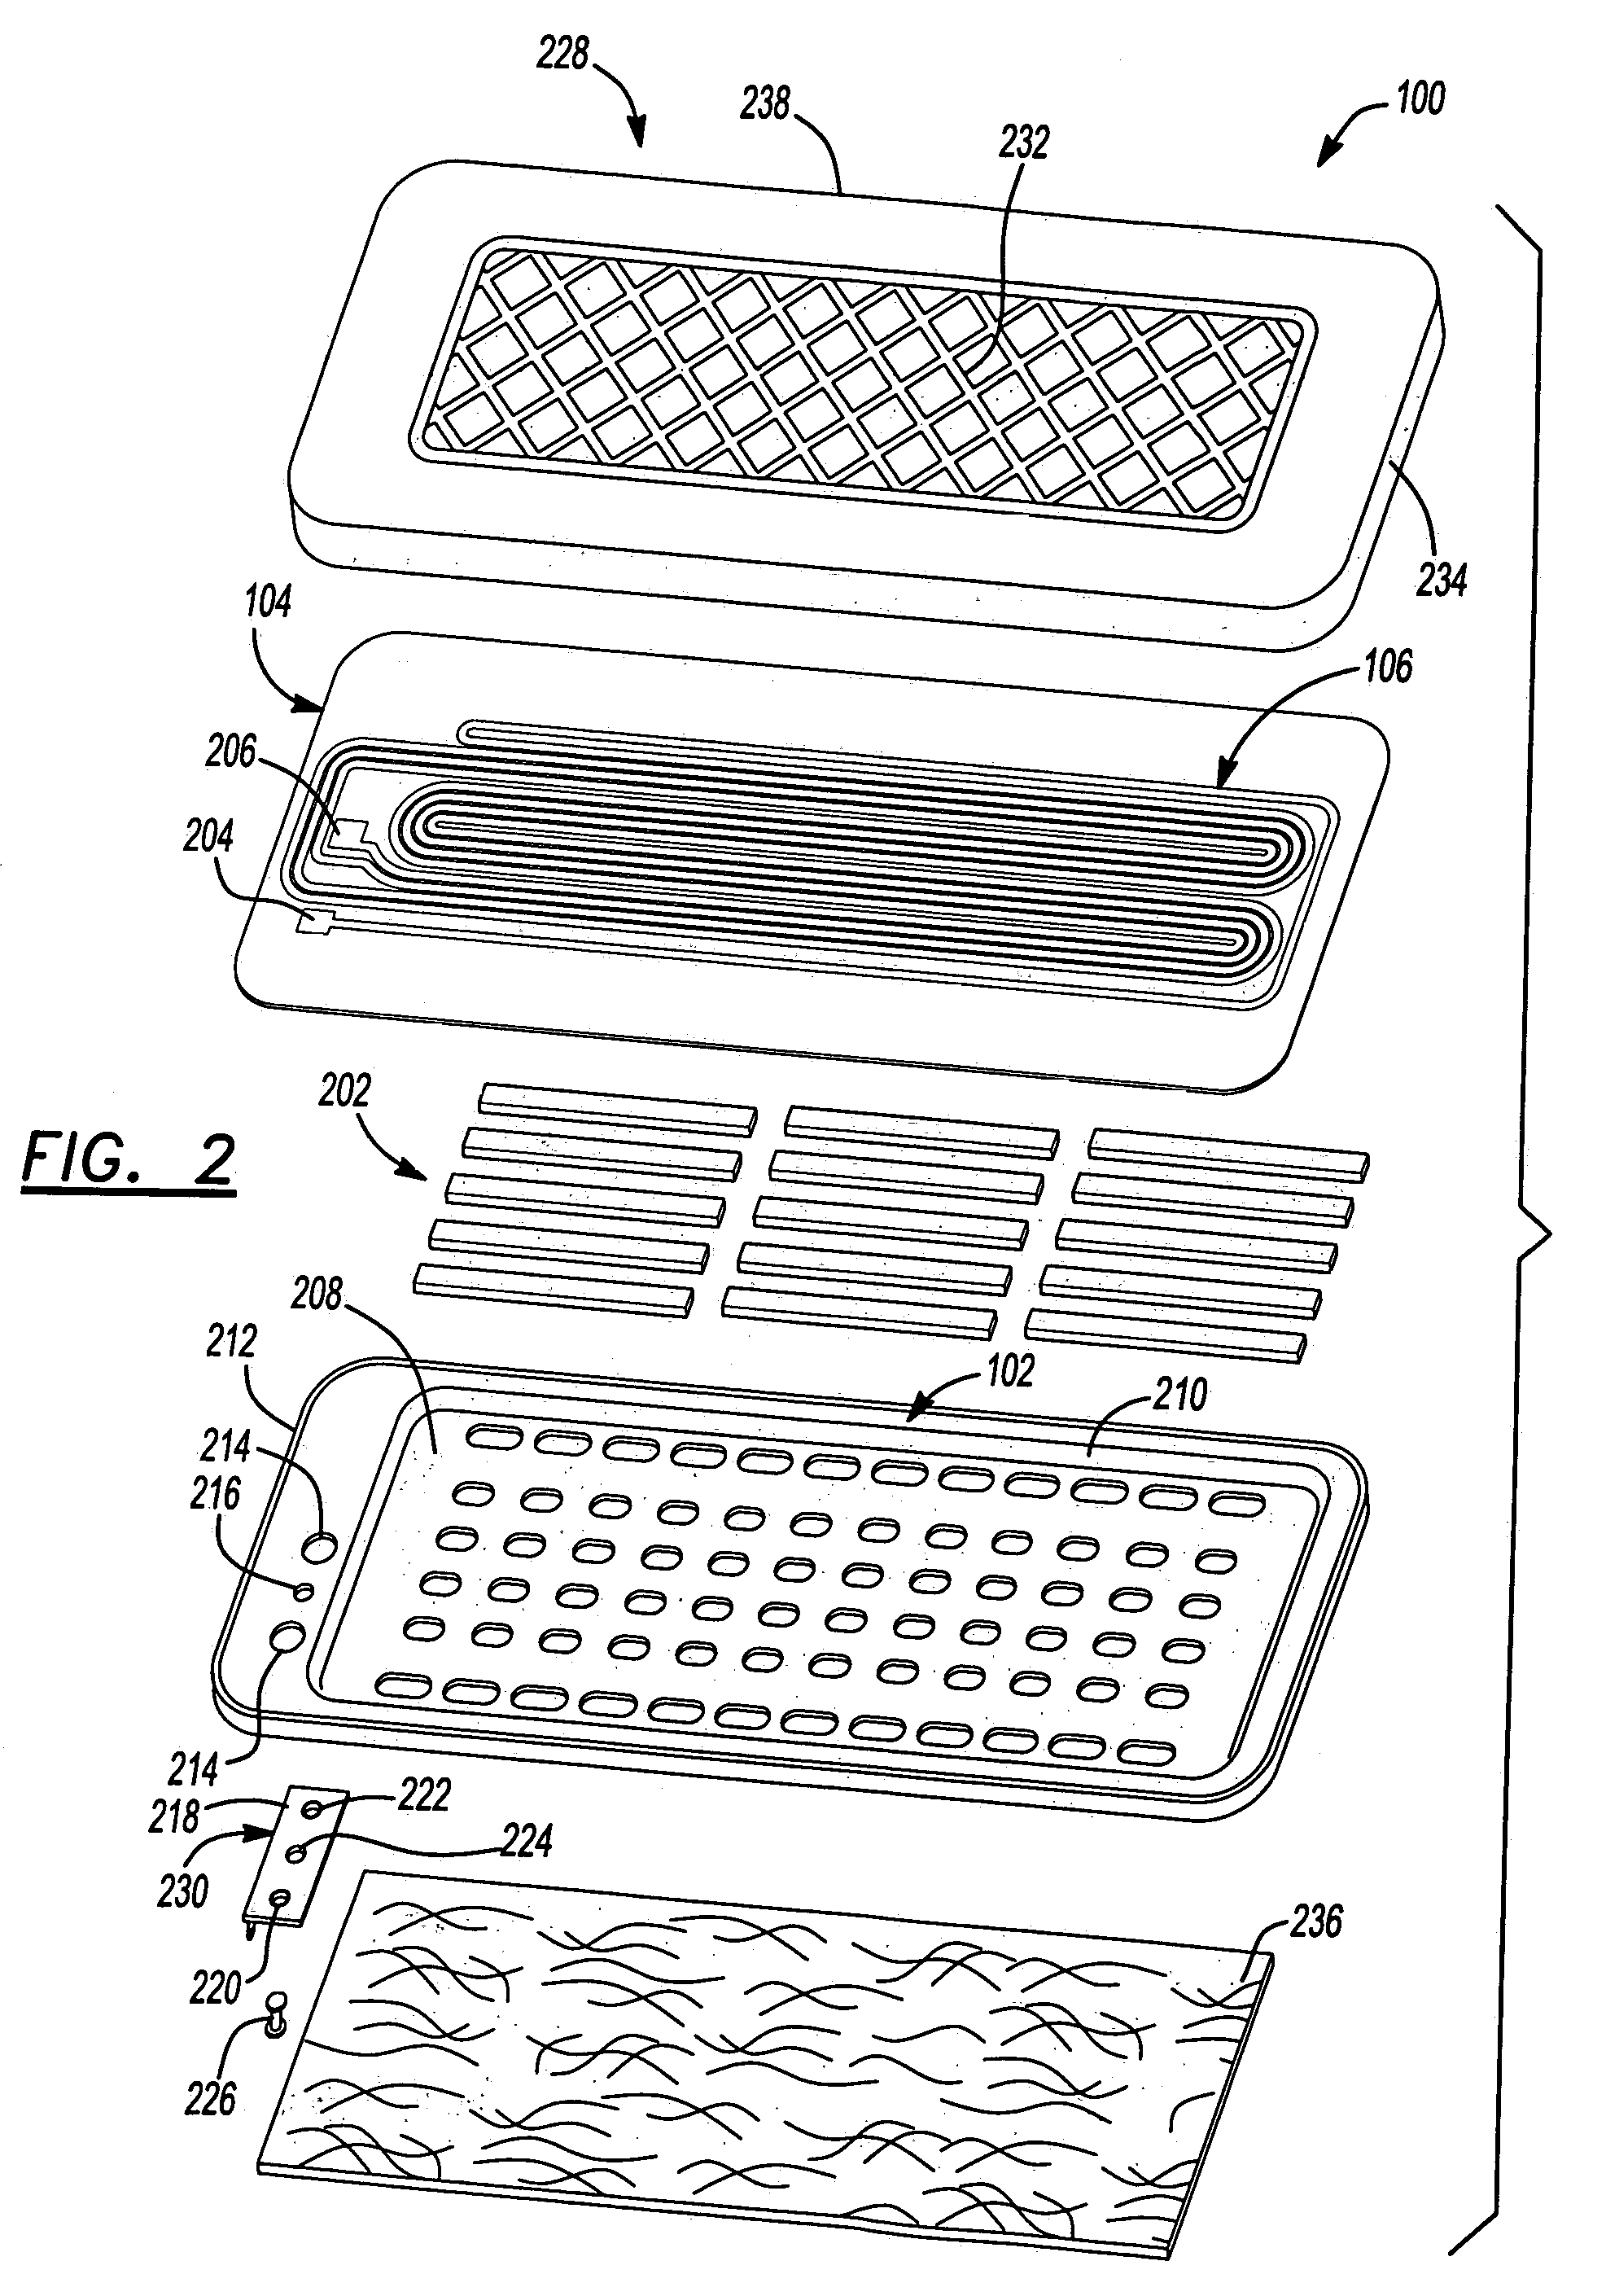 Method of tensioning a diaphragm for an electro-dynamic loudspeaker